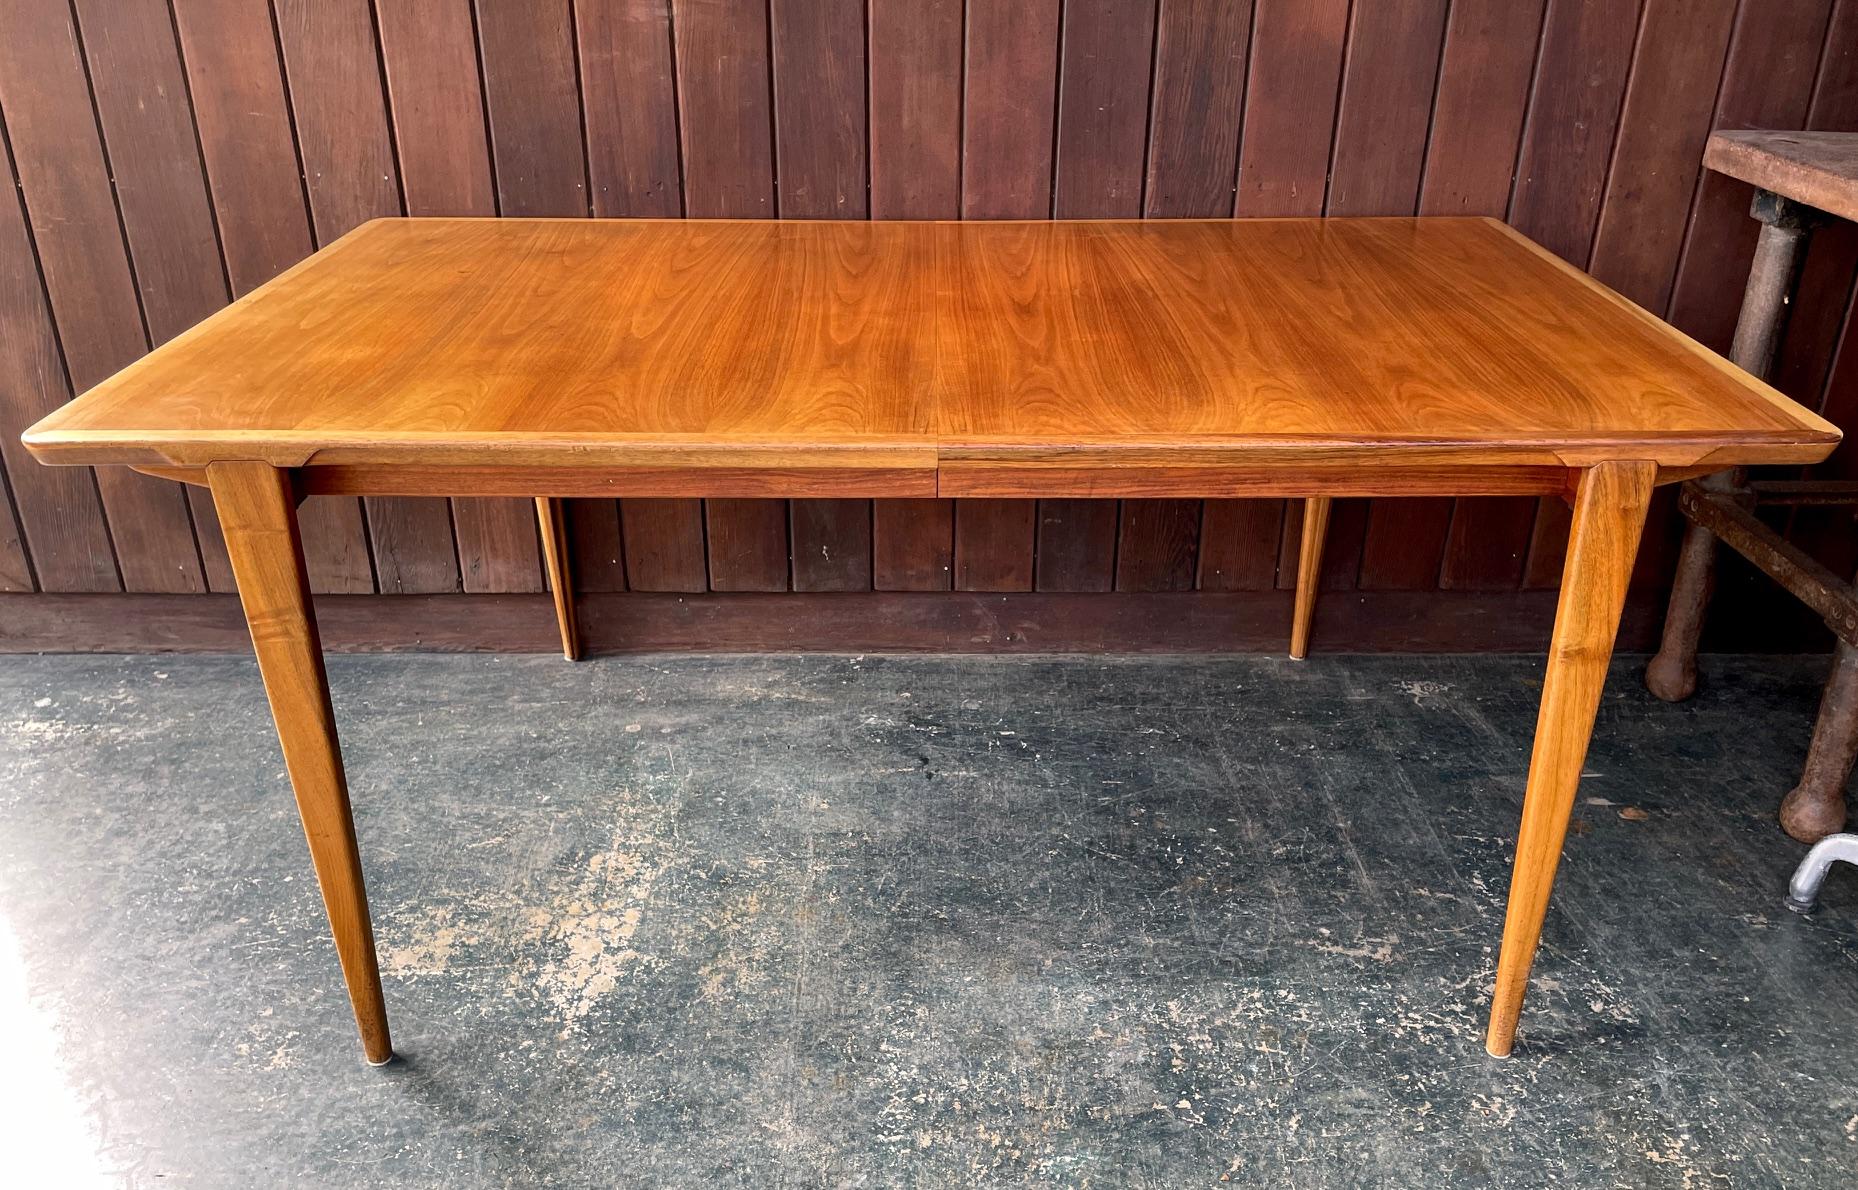 Amazing design, very high quality craftsmanship and details, this was an artisan produced piece and distributed by Illums Bolighus, for Henry Rosengren Hansen. 

This teak dining table comes with two hidden leaves that store inside the table, each